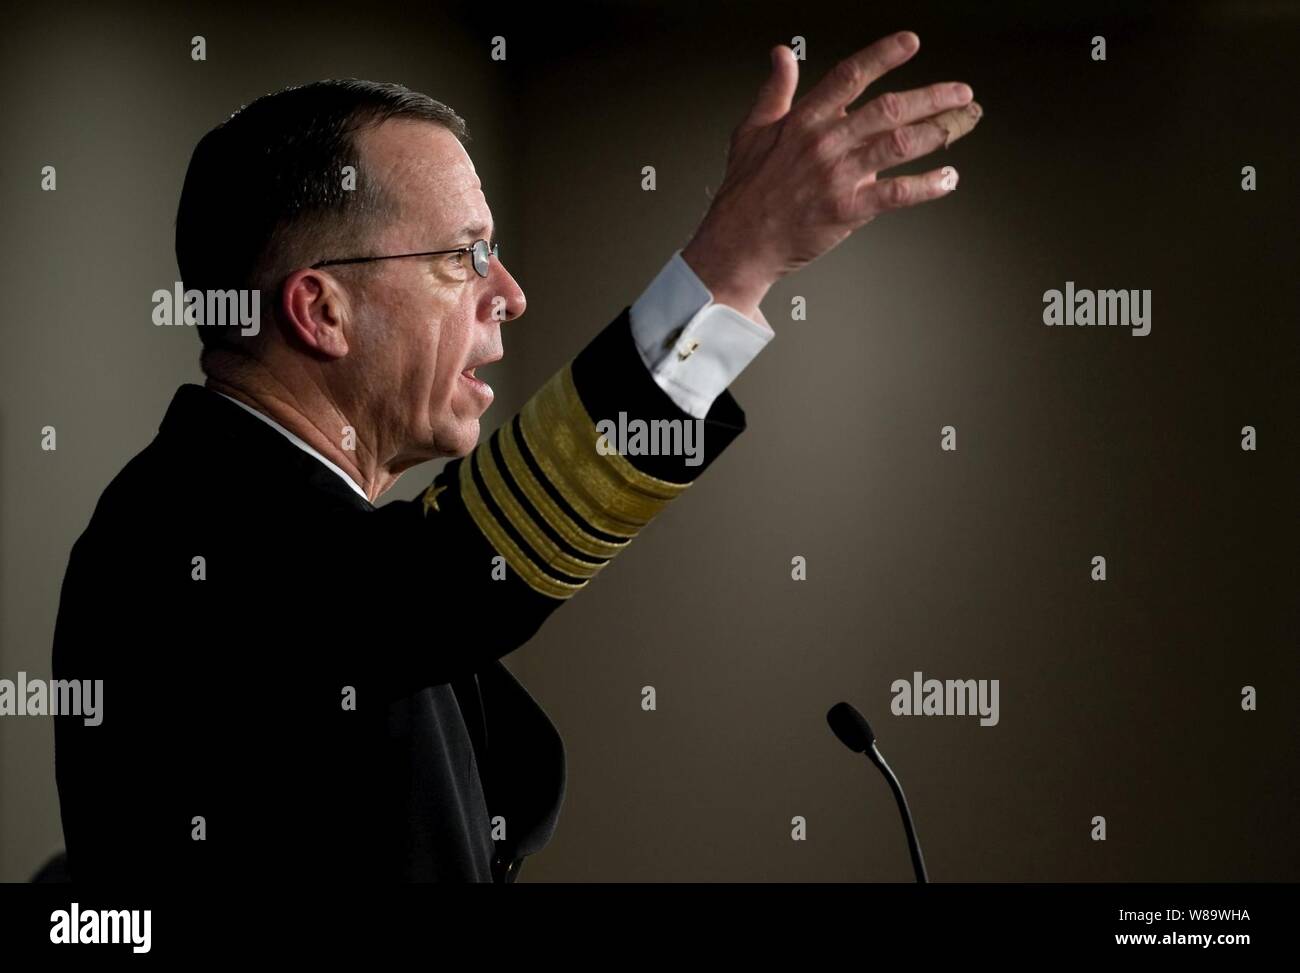 Chairman of the Joint Chiefs of Staff Adm. Mike Mullen, U.S. Navy, addresses the Heritage Foundation in Washington, D.C., on April 15, 2008.  The Heritage Foundation is an educational institute whose mission is to formulate and promote conservative public policies based on the principles of free enterprise, limited government, individual freedom, traditional American values, and a strong national defense. Stock Photo